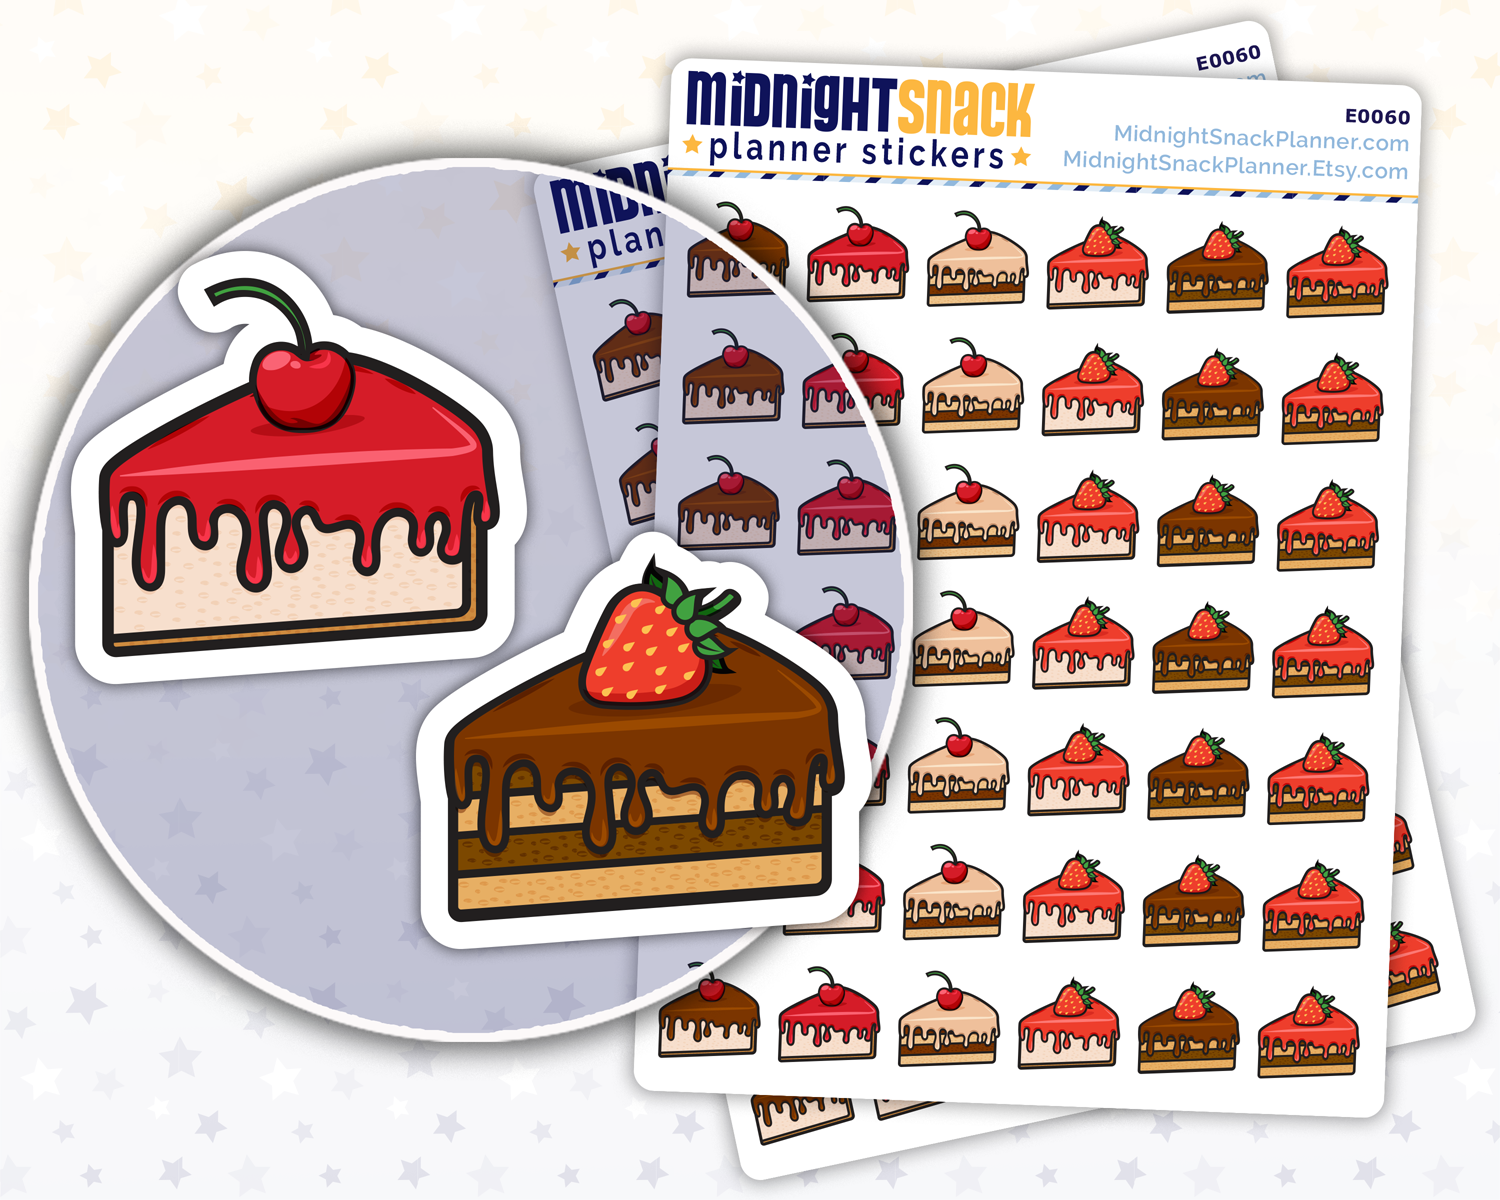 Cake and Cheese Cake Icon Stickers: Meal Planning Planner Stickers